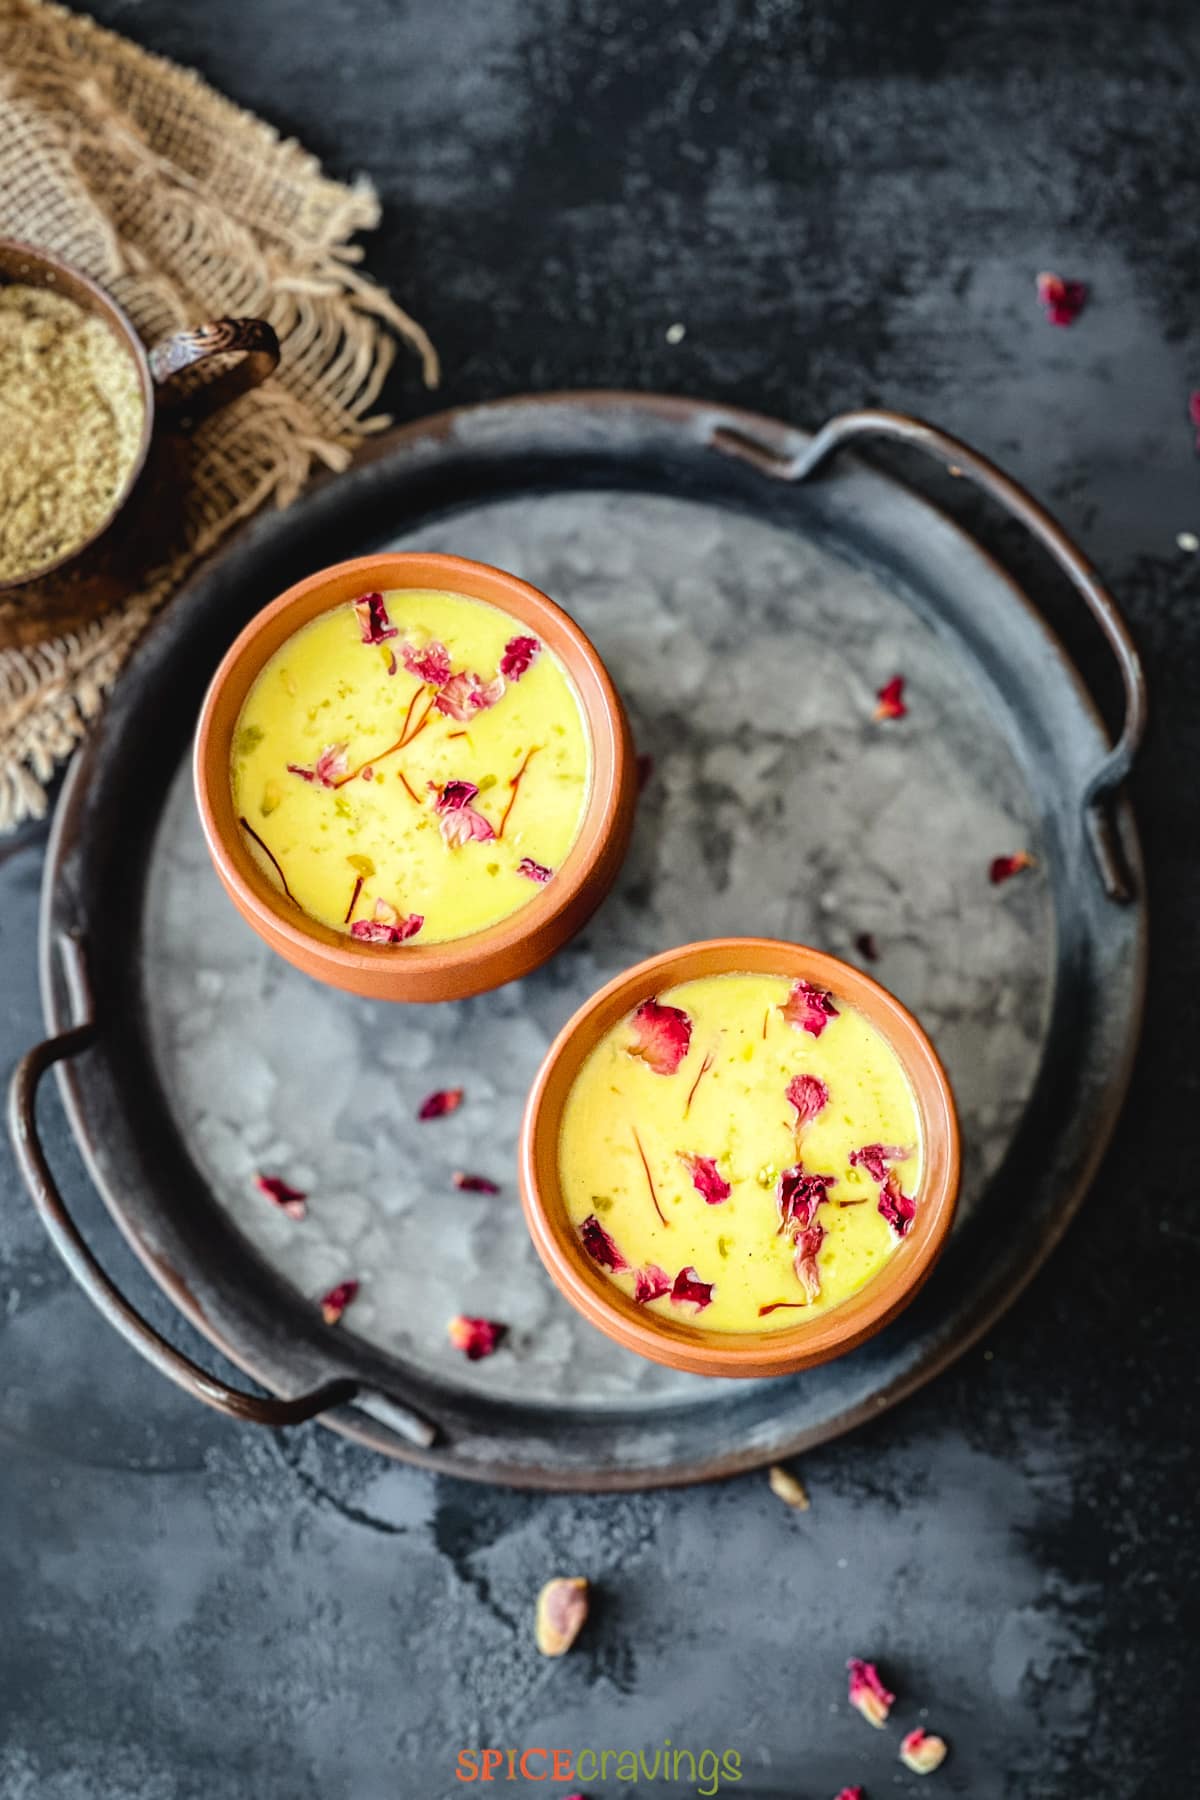 Two clay cups with yellow colored milk with rose petals